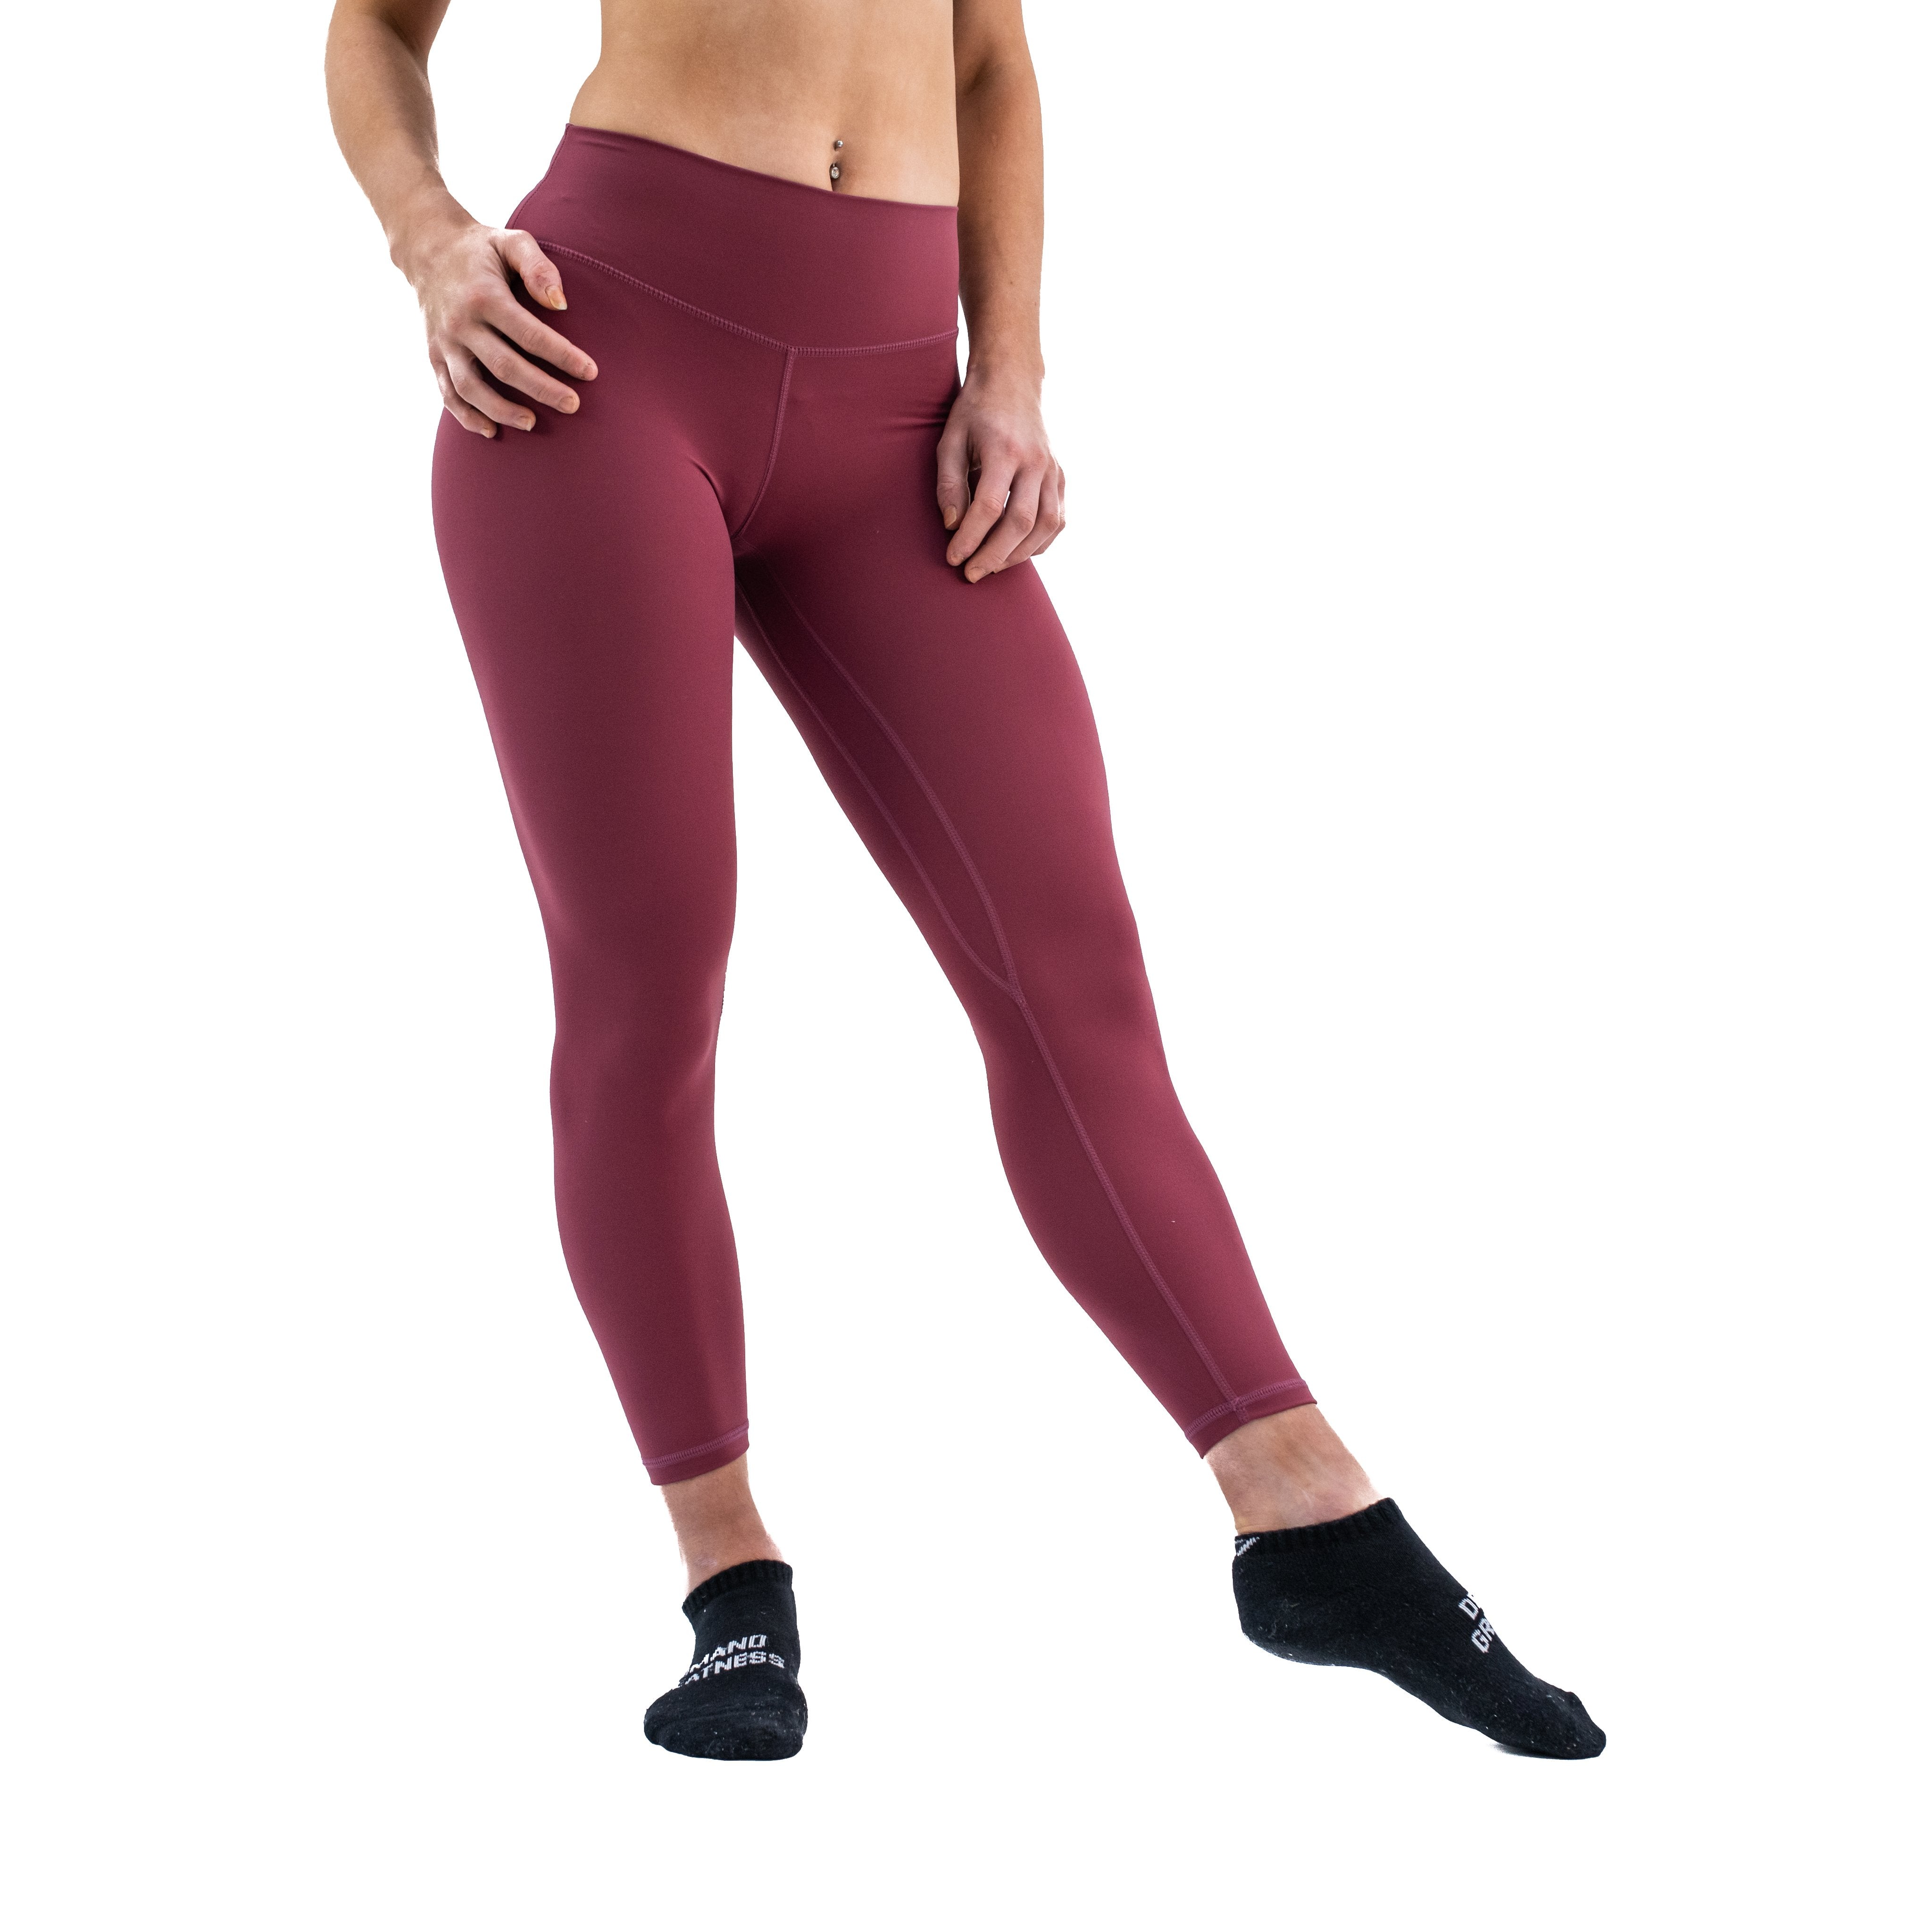 A7 XO Leggings are here! Made from super-soft moisture-wicking material, these are comfortable to wear during your workout or just to lounge around in. The best Powerlifting apparel and accessories for all your workouts. Available in UK and Europe including France, Italy, Germany, Sweden and Poland.